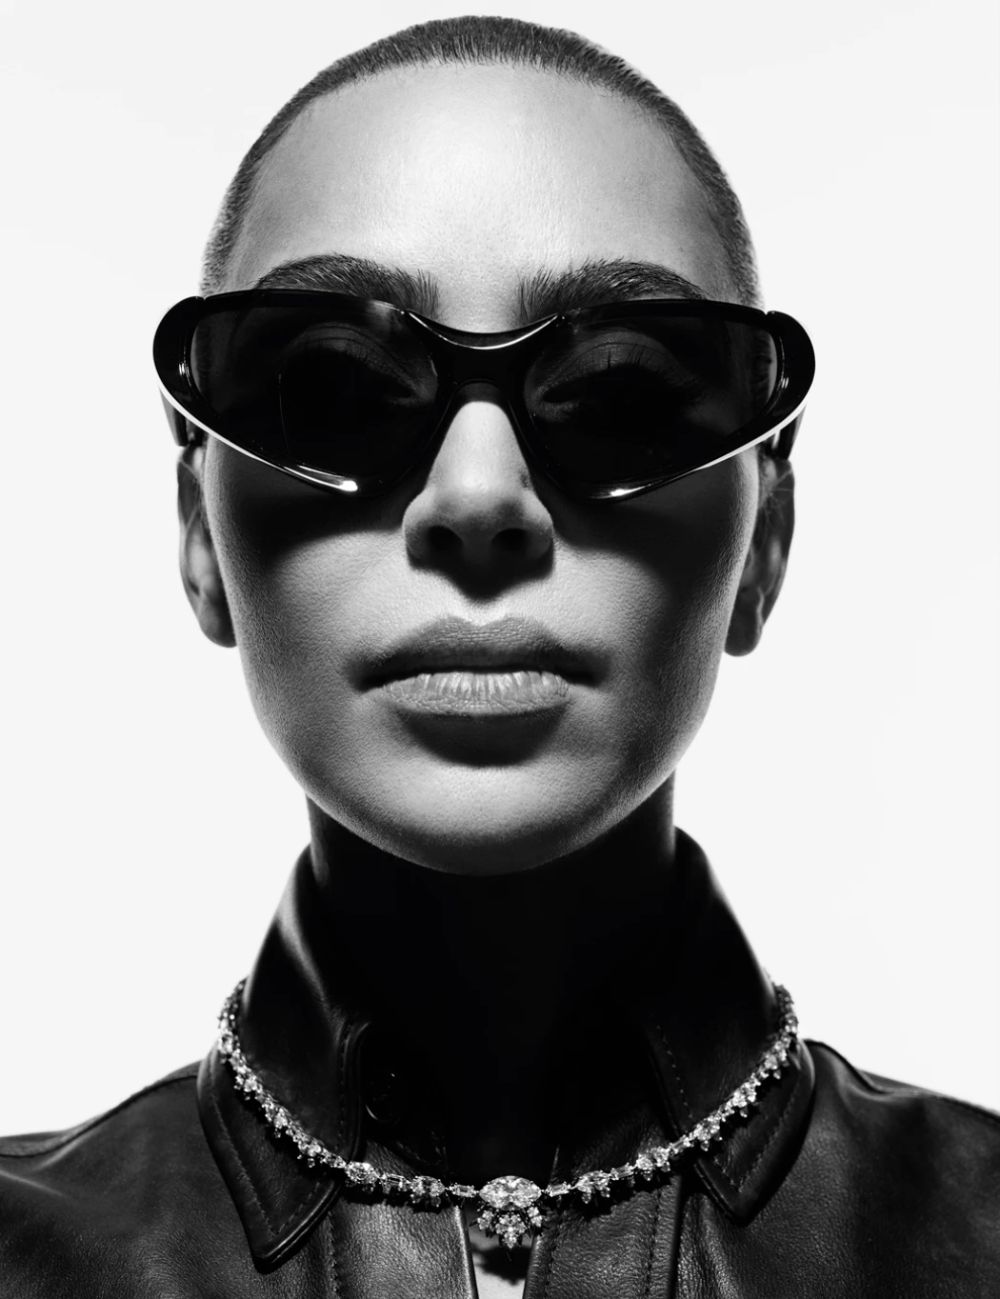 Kim Kardashian West by Mario Sorrenti for i-D Magazine Winter 2021 Clothing & Jewelry: Top and Sunglasses by Balenciaga; Necklace by Tiffany & Co.